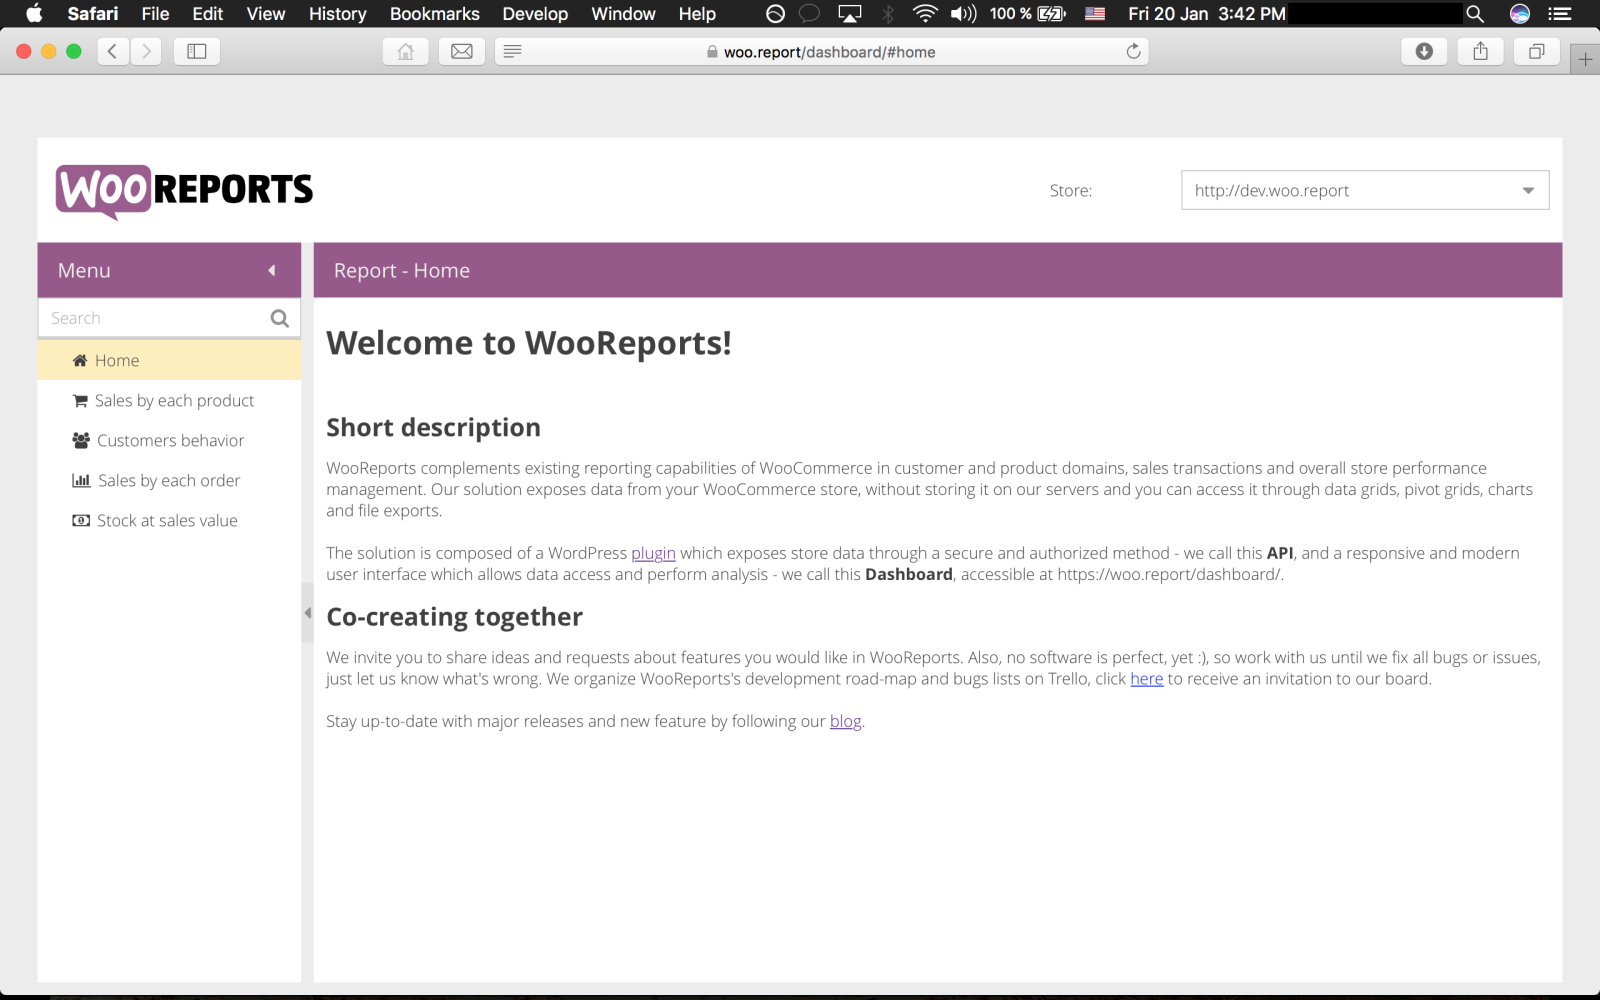 Welcome screen of WooReports